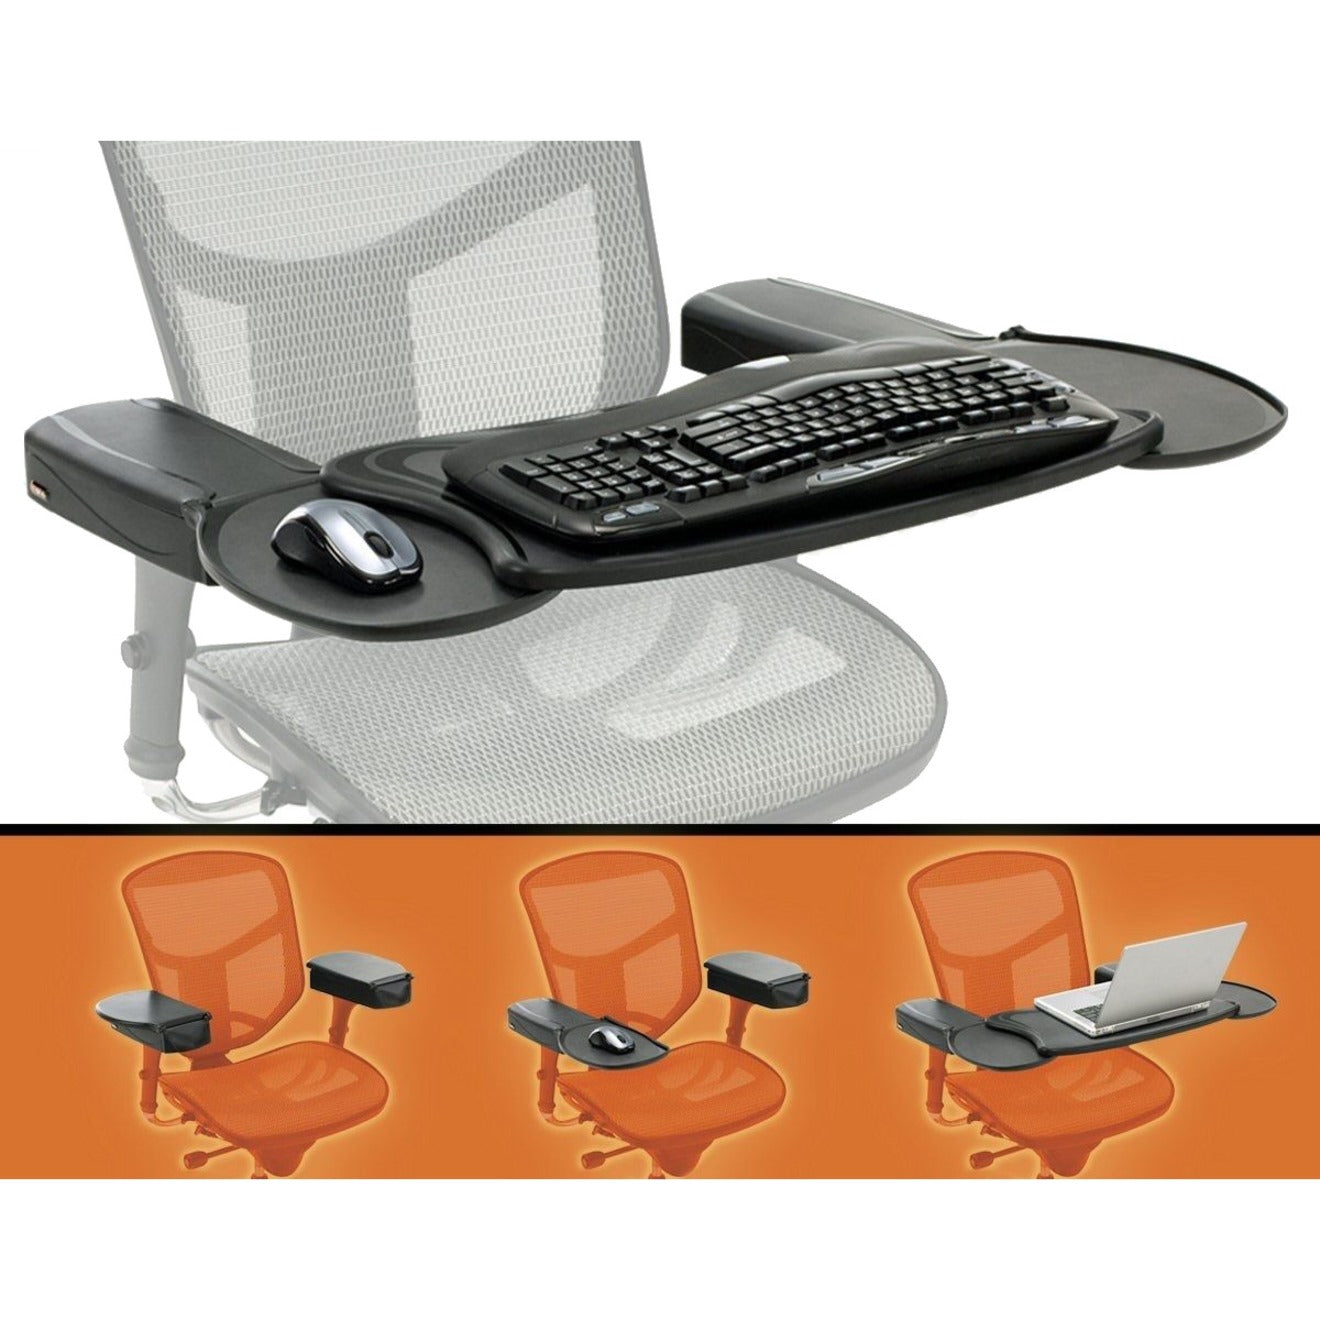 Mobo Chair Mount Ergo Keyboard and Mouse Tray System - 2.5-Inch x 12.5-Inch  x 7.5-Inch - Black